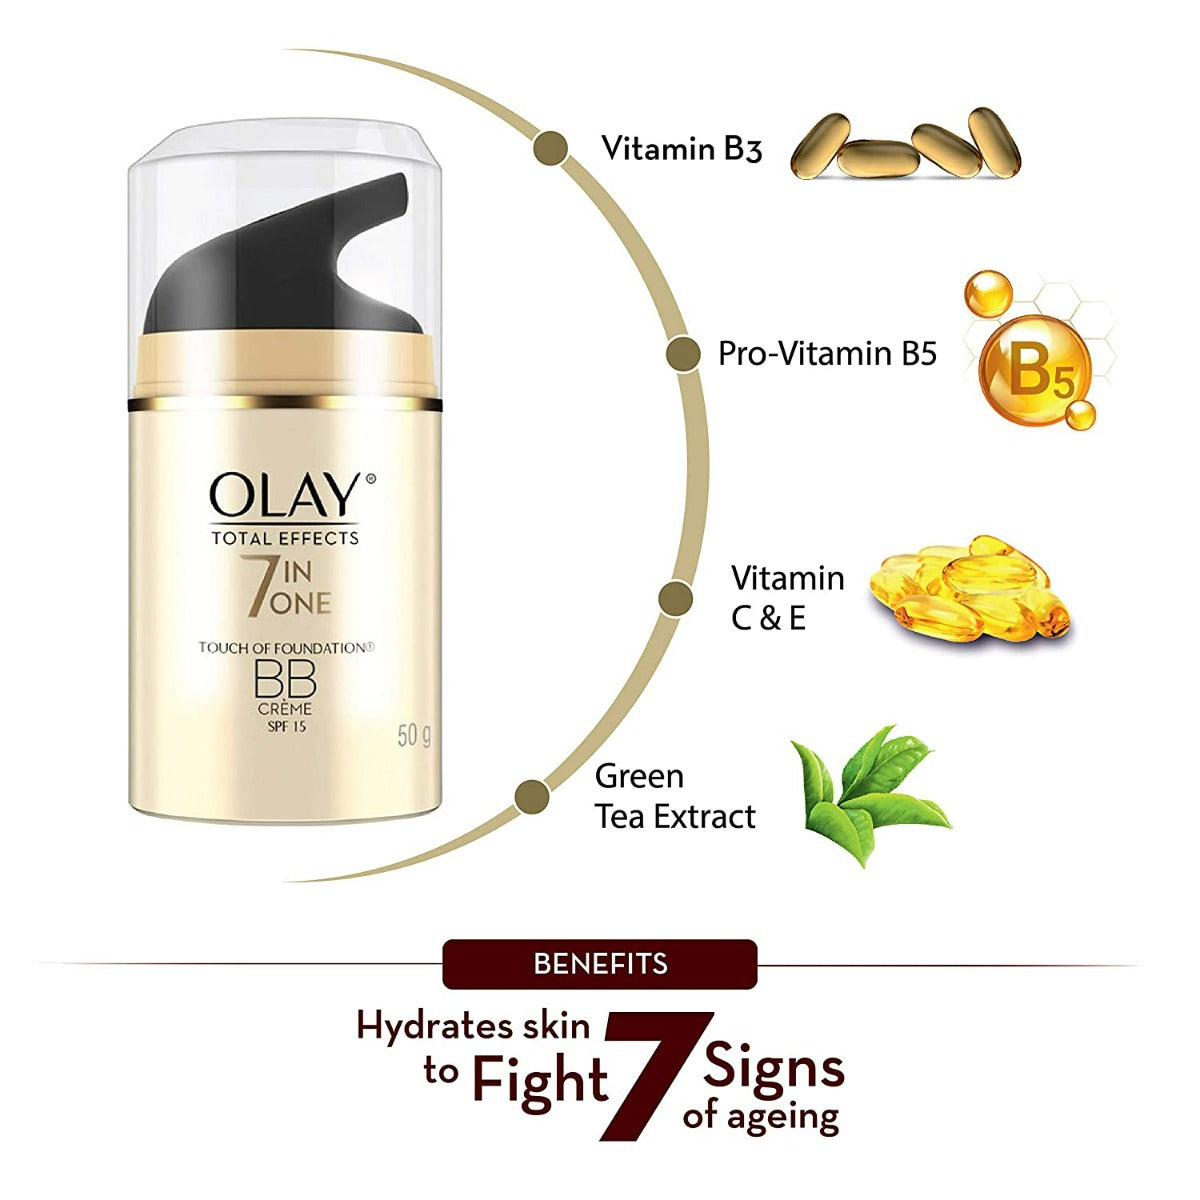 Olay Total Effects 7 In One Touch of Foundation BB Cream SPF 15 (50gm)